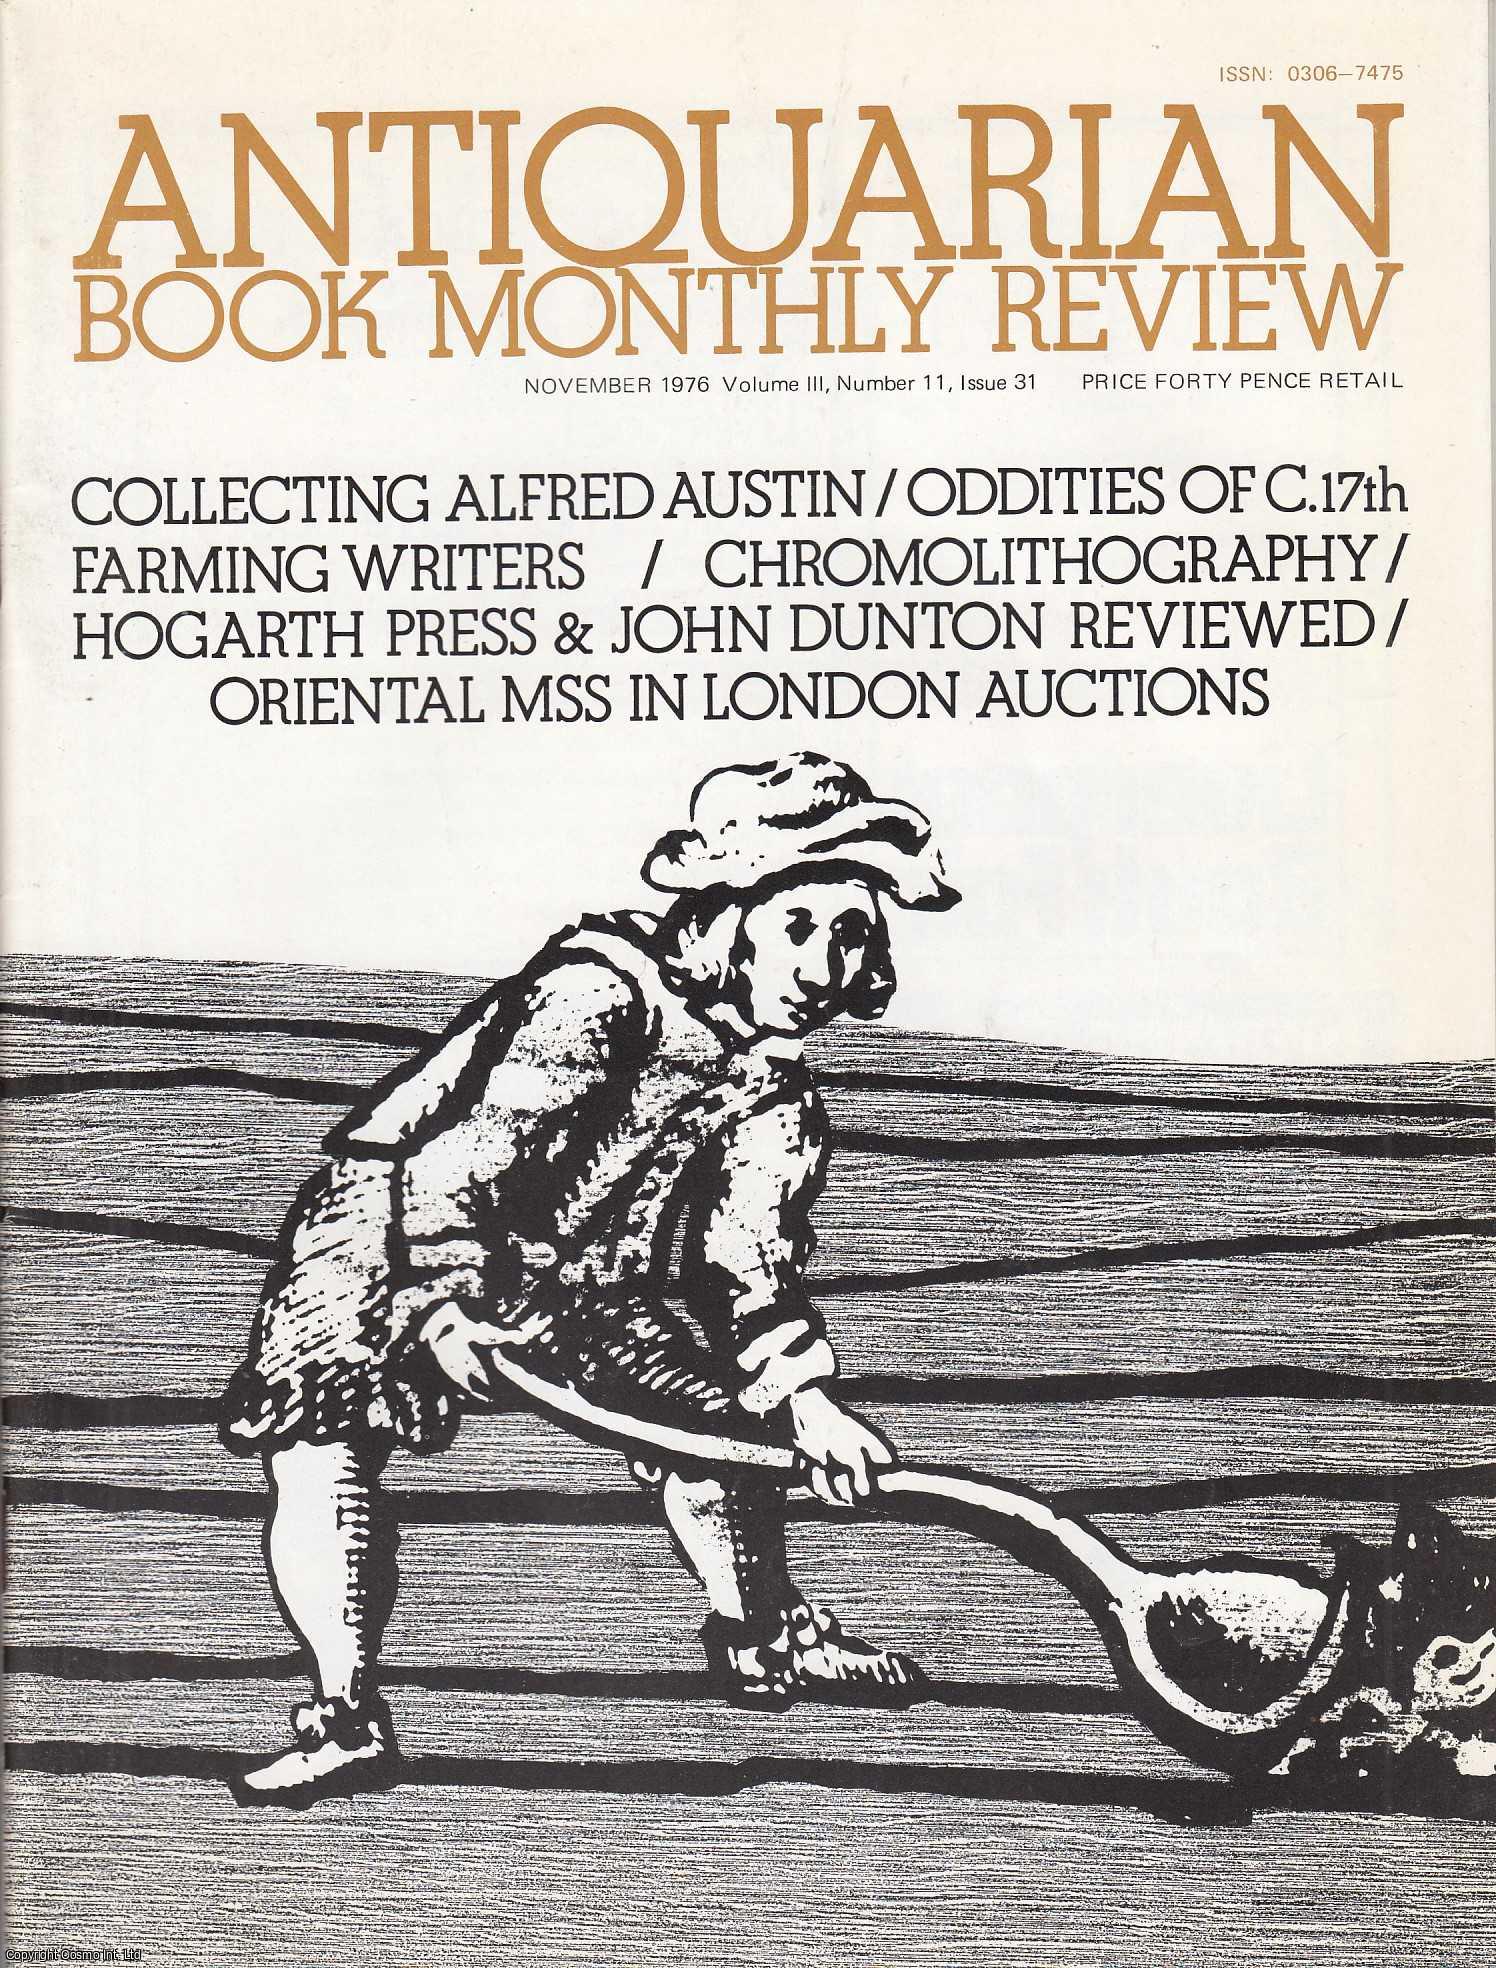 G.E. Fussell - Oddities of 17th Century Farming Writers. An original article contained in a complete monthly issue of the Antiquarian Book Monthly Review.